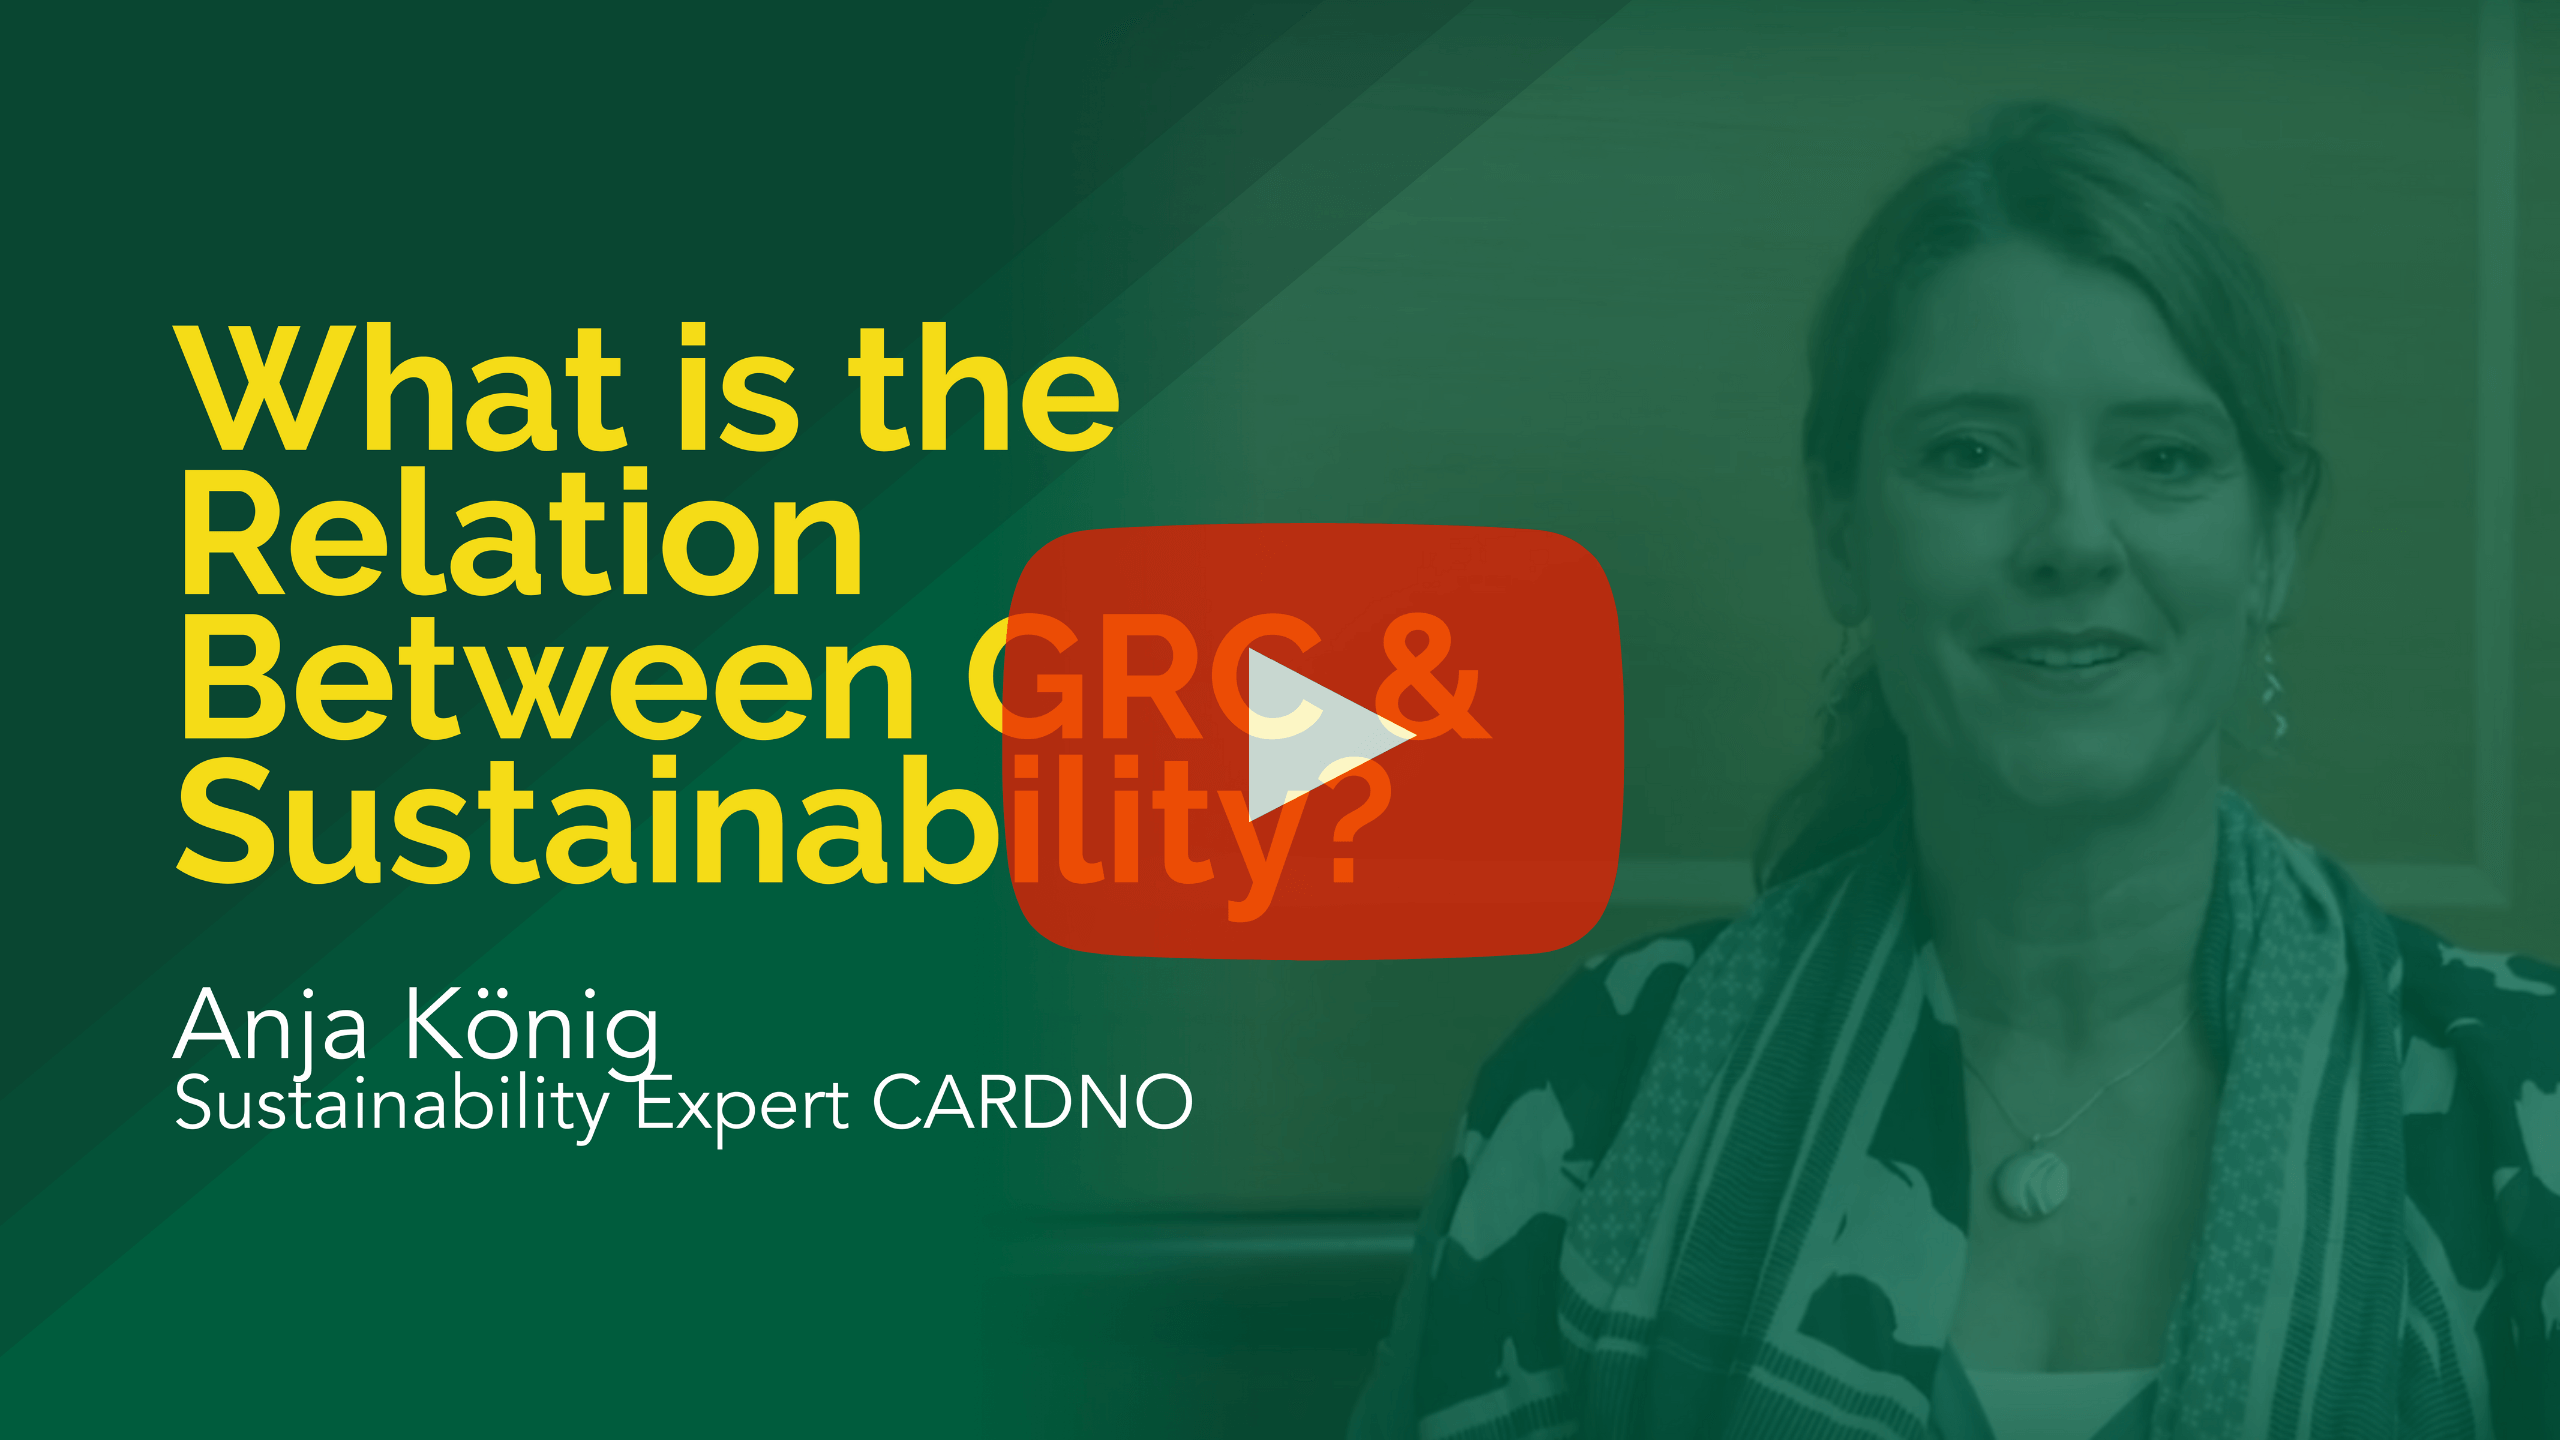 What is the Relation Between GRC & Sustainability?